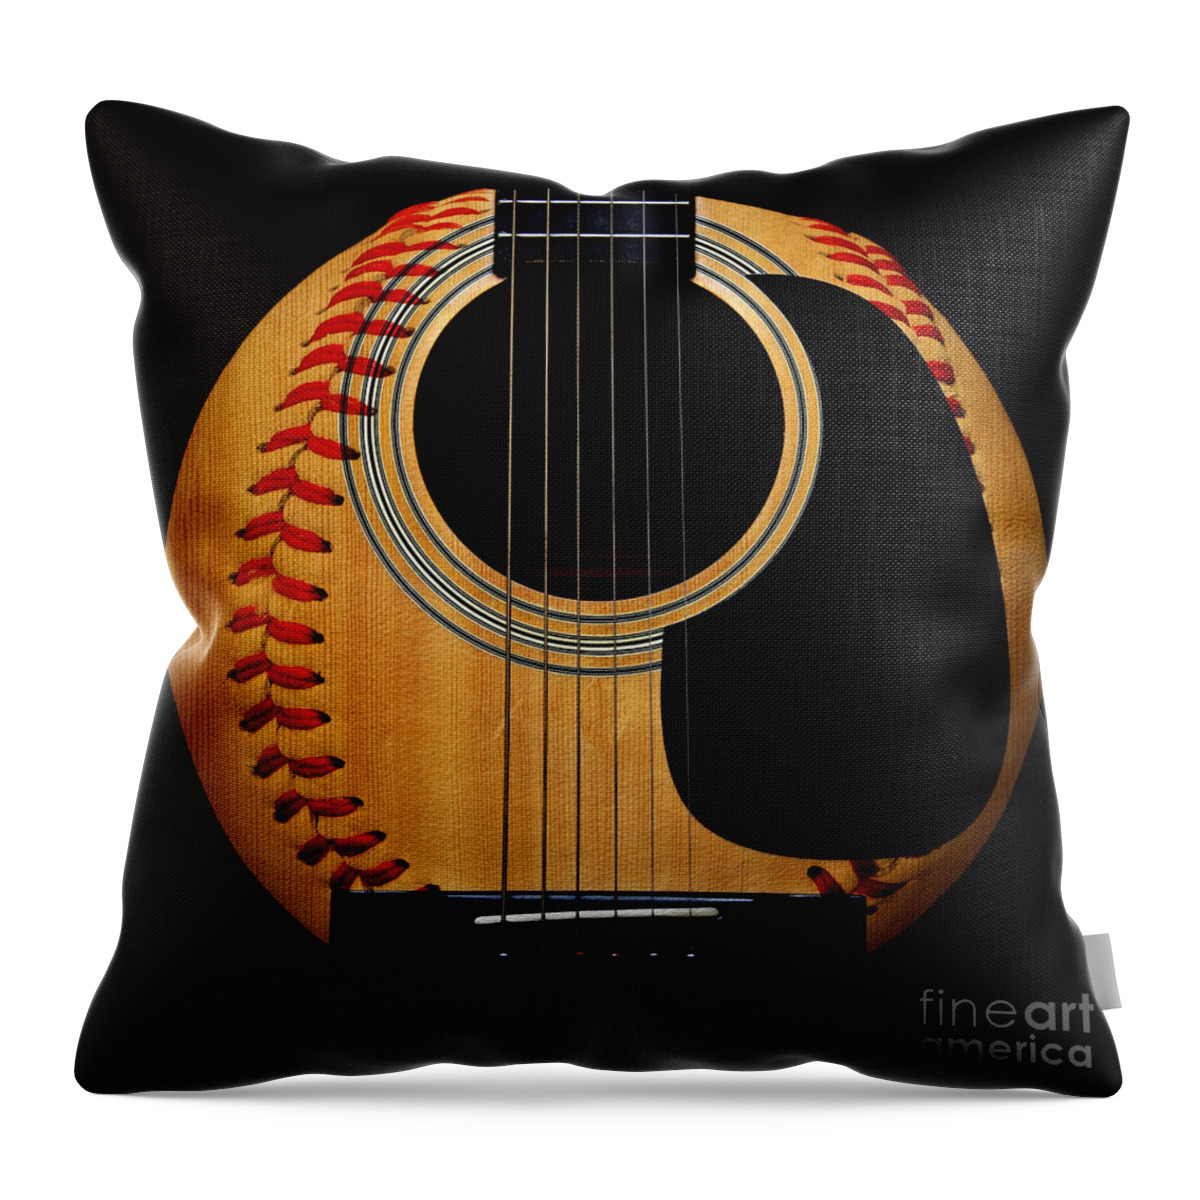 Baseball Throw Pillow featuring the photograph Guitar Baseball Square by Andee Design